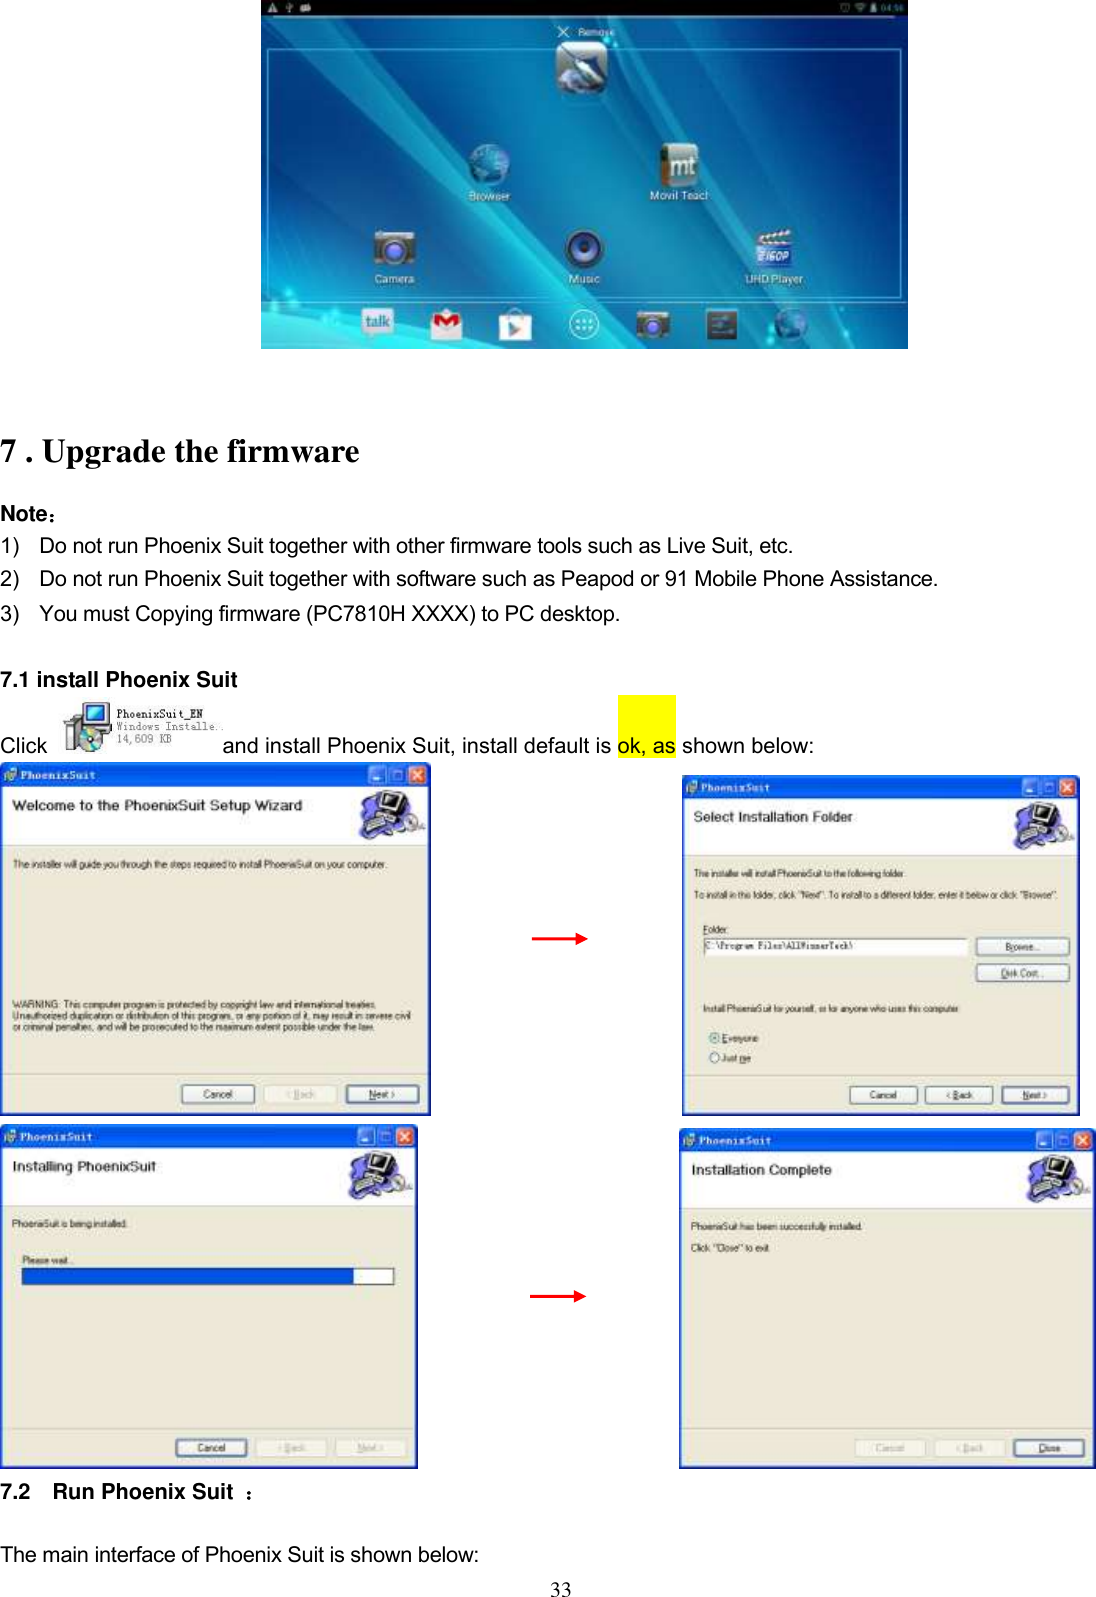  33   7 . Upgrade the firmware Note： 1)    Do not run Phoenix Suit together with other firmware tools such as Live Suit, etc.   2)    Do not run Phoenix Suit together with software such as Peapod or 91 Mobile Phone Assistance. 3)    You must Copying firmware (PC7810H XXXX) to PC desktop.  7.1 install Phoenix Suit Click  and install Phoenix Suit, install default is ok, as shown below:                                                                       7.2    Run Phoenix Suit  ： The main interface of Phoenix Suit is shown below: 